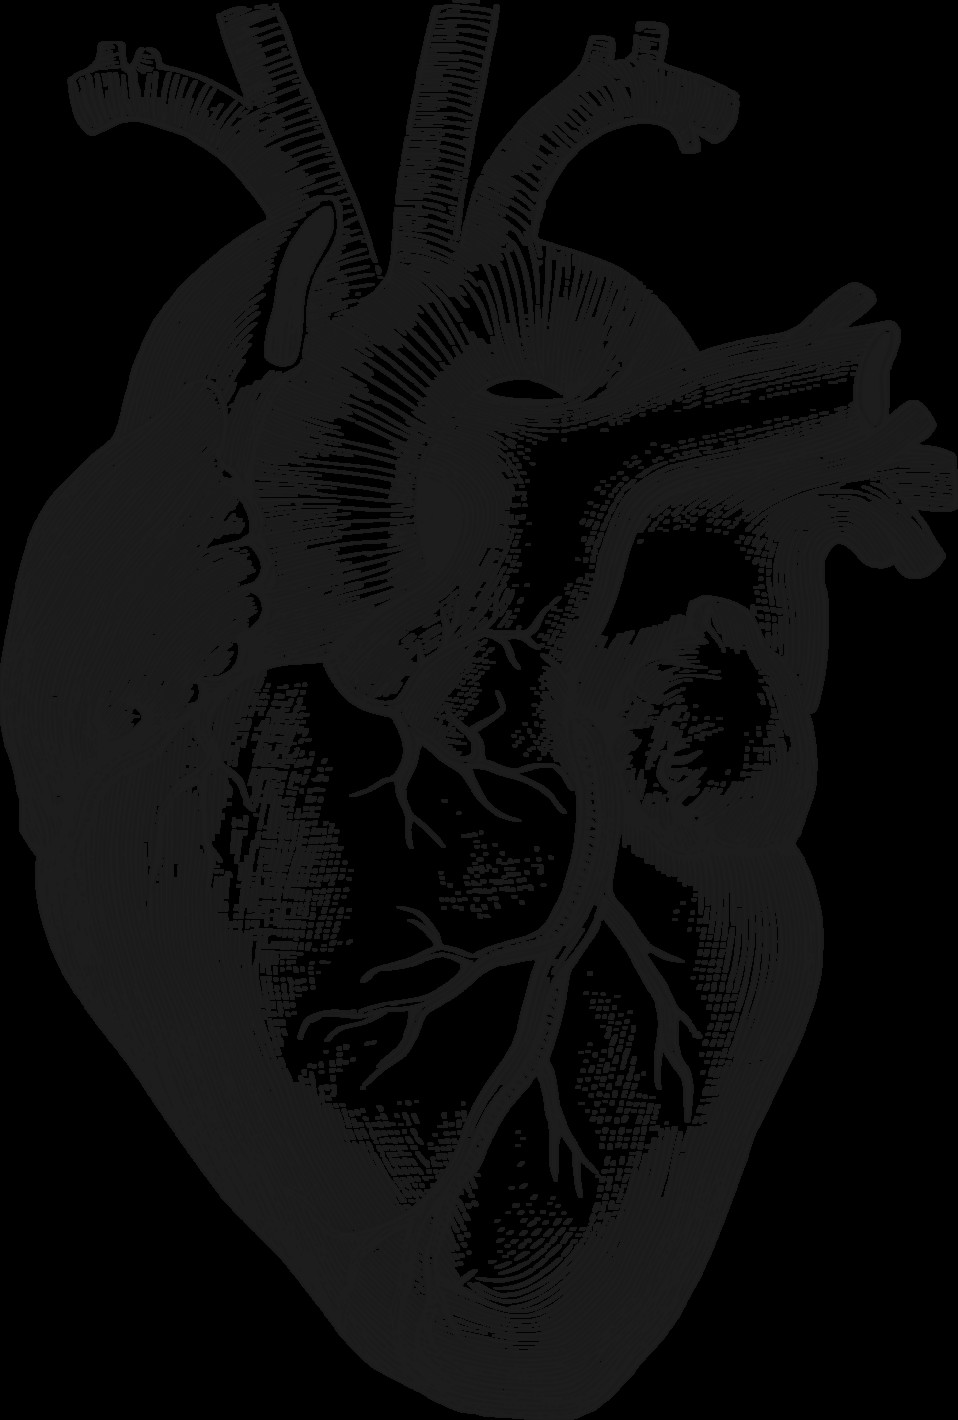 Drawing Heart is Anatomical Heart Art Anatomical Heart Heart Anatomical Heart